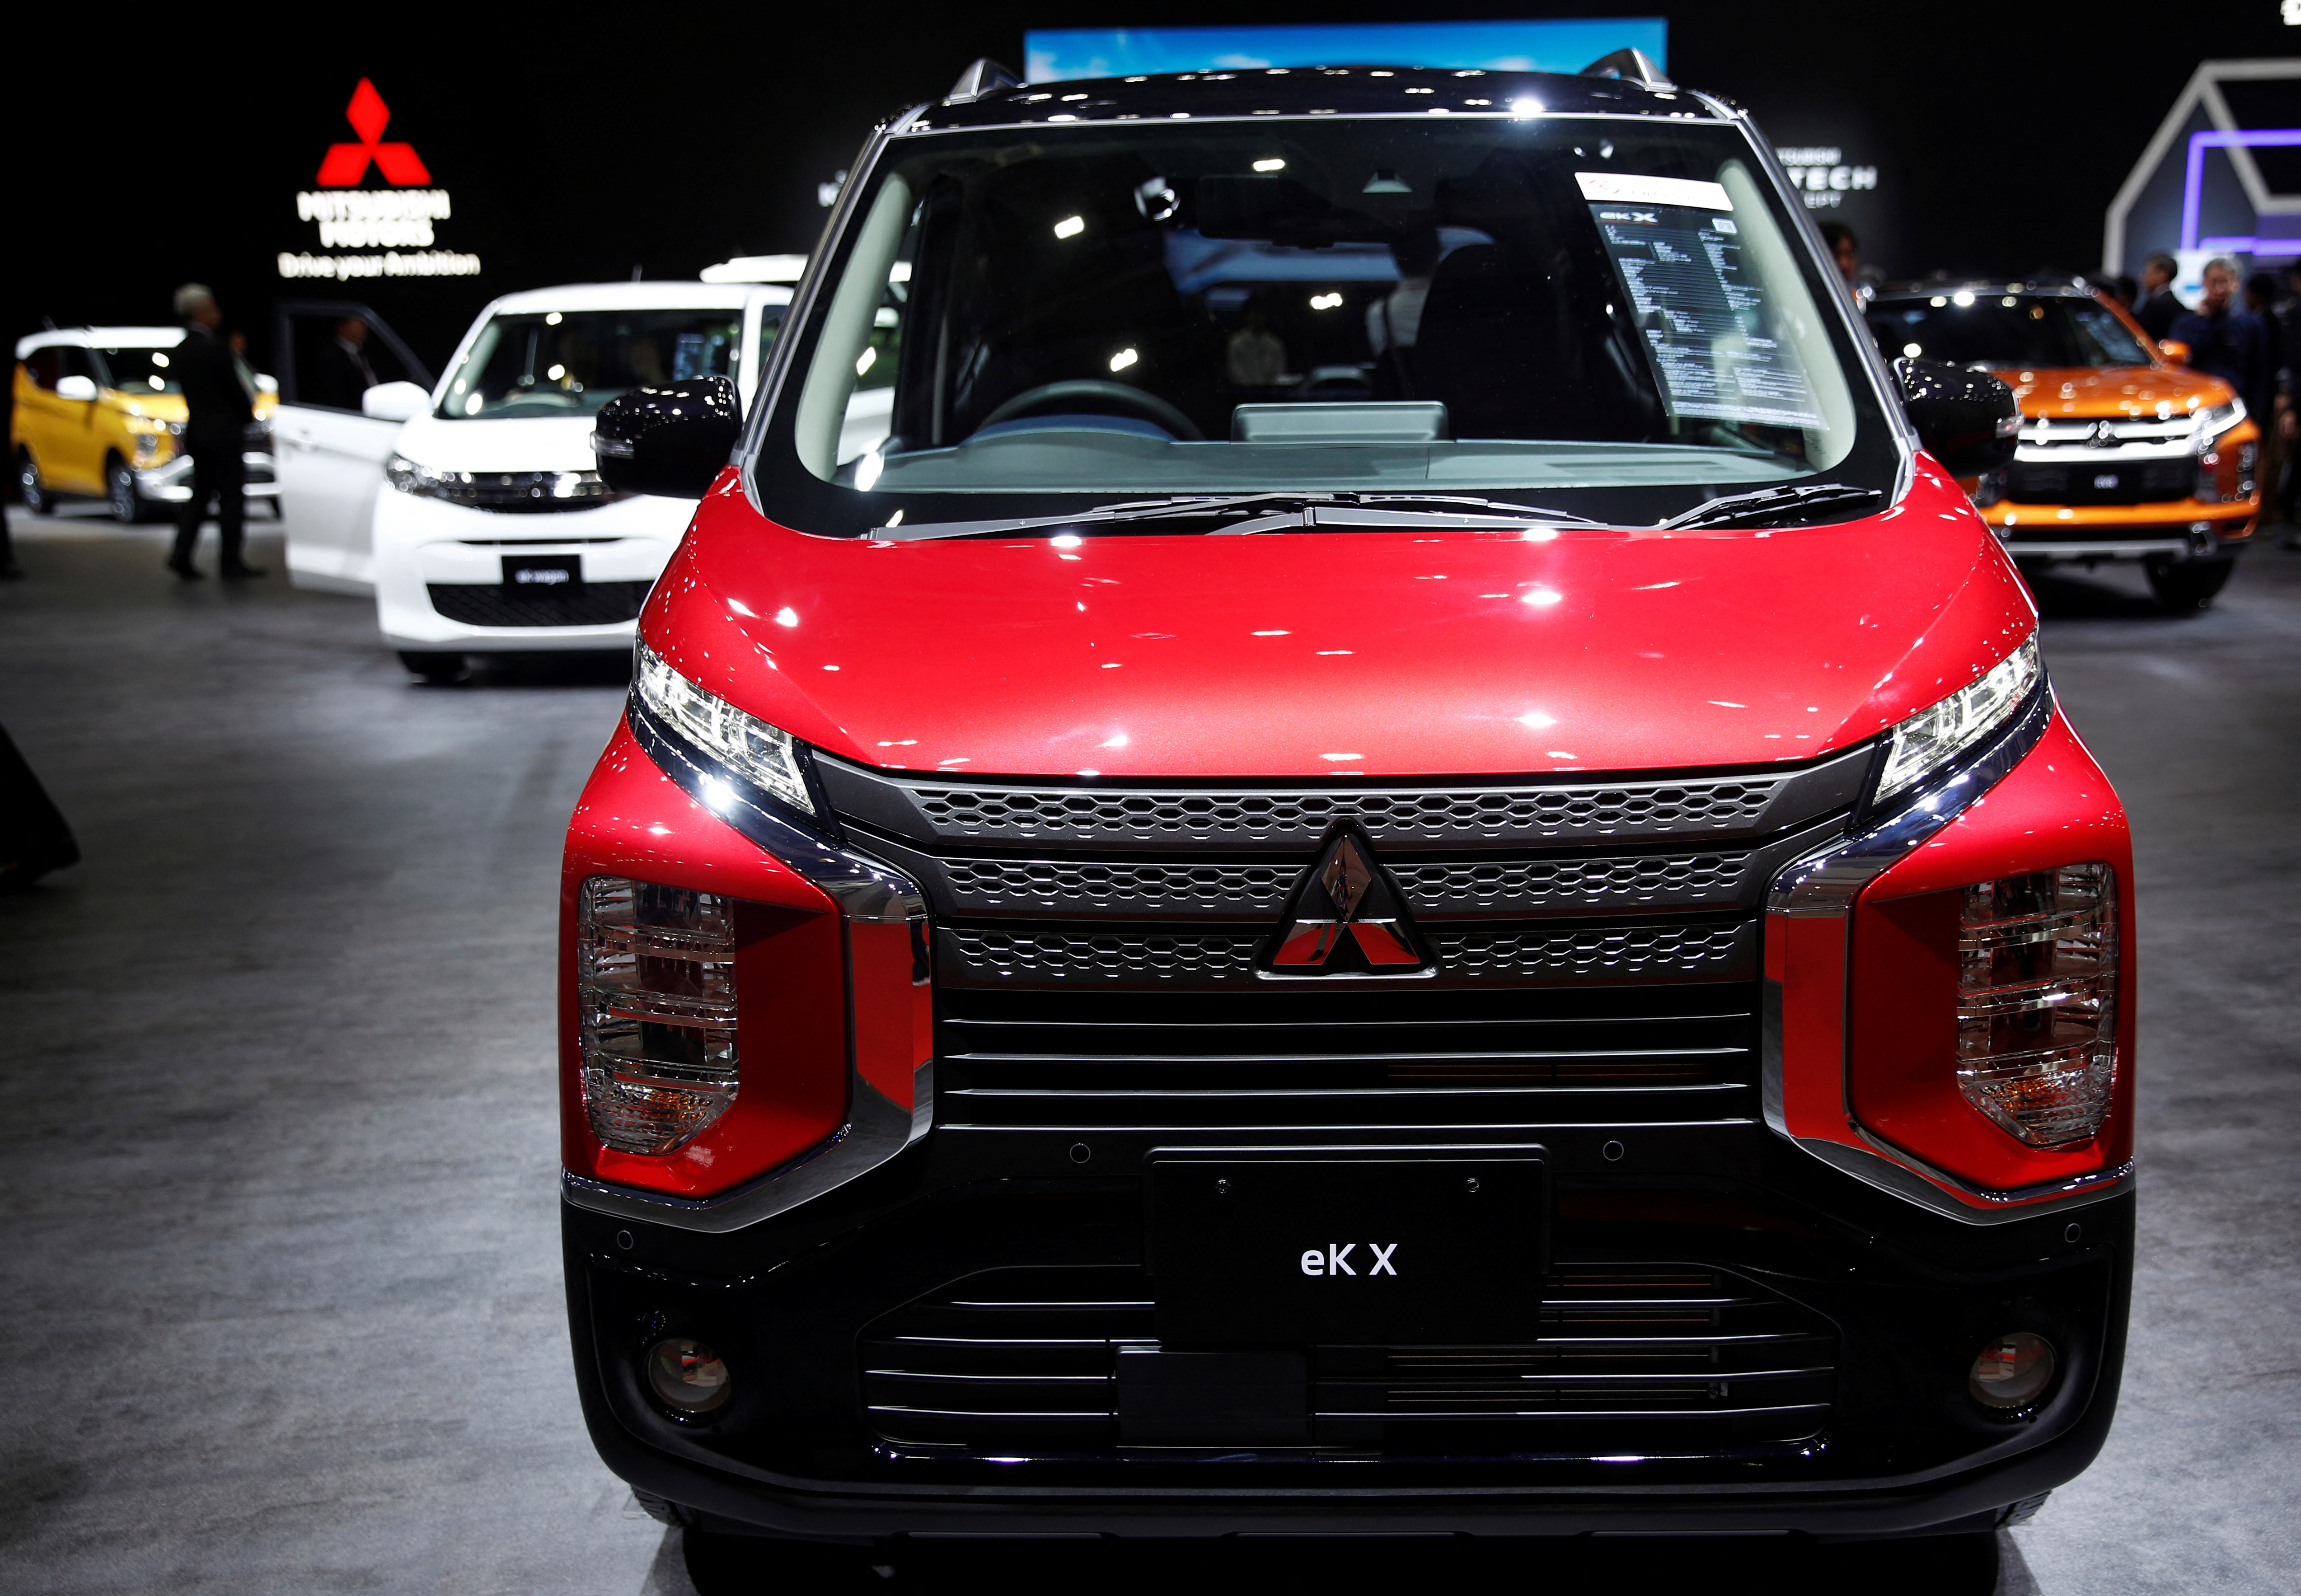 A Mitsubishi ek electric kei car is pictured at the Tokyo Motor Show, in Tokyo